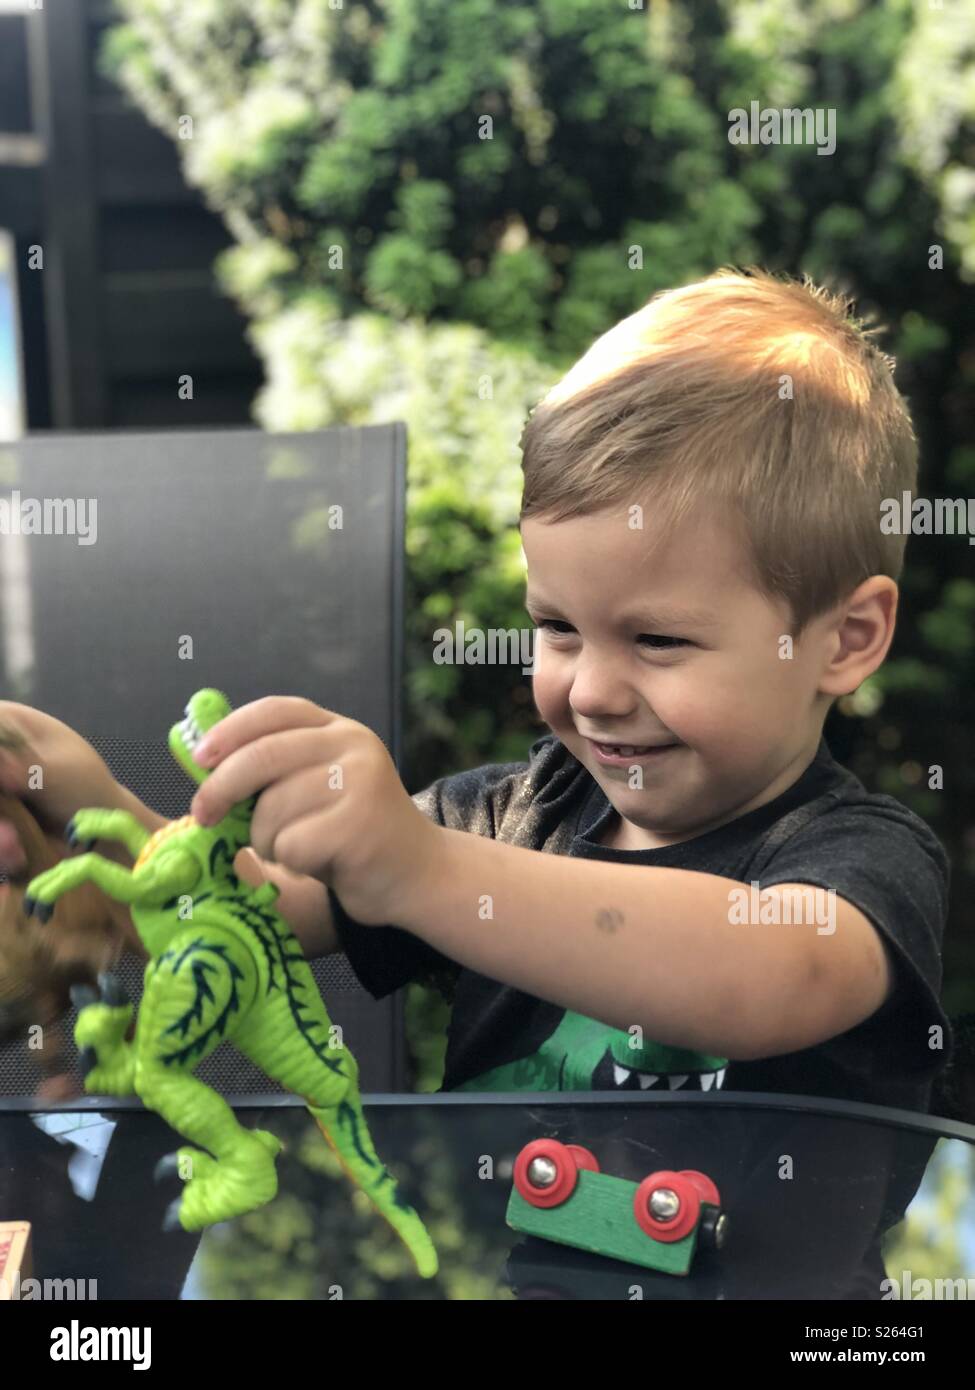 A boy playing with his toy dinosaurs Stock Photo